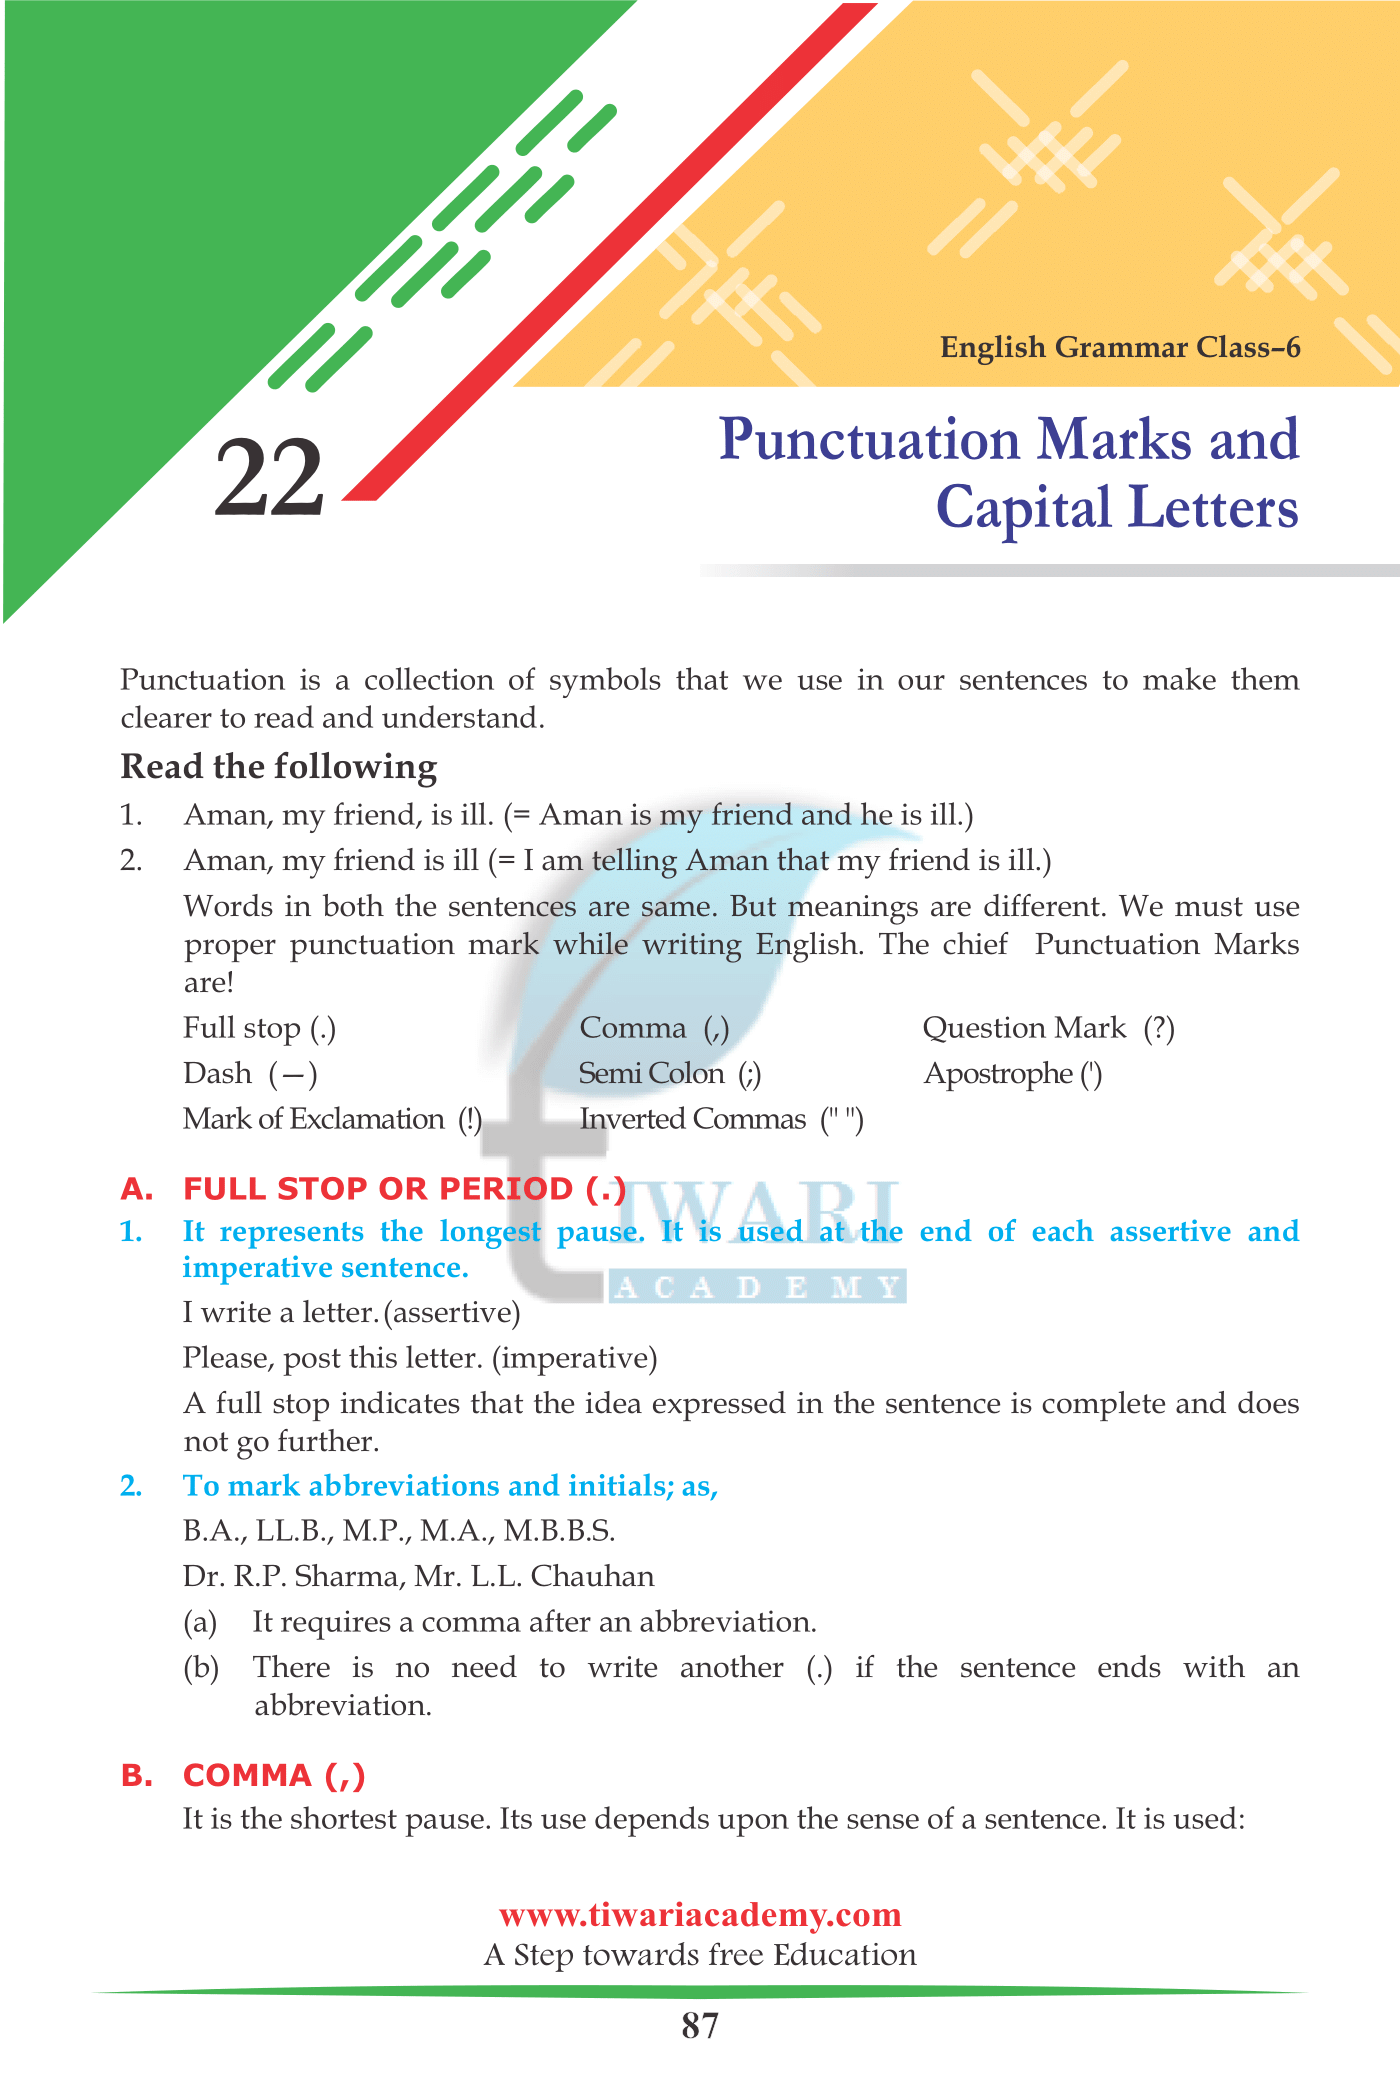 Class 6 English Grammar Chapter 22 Punctuation Marks